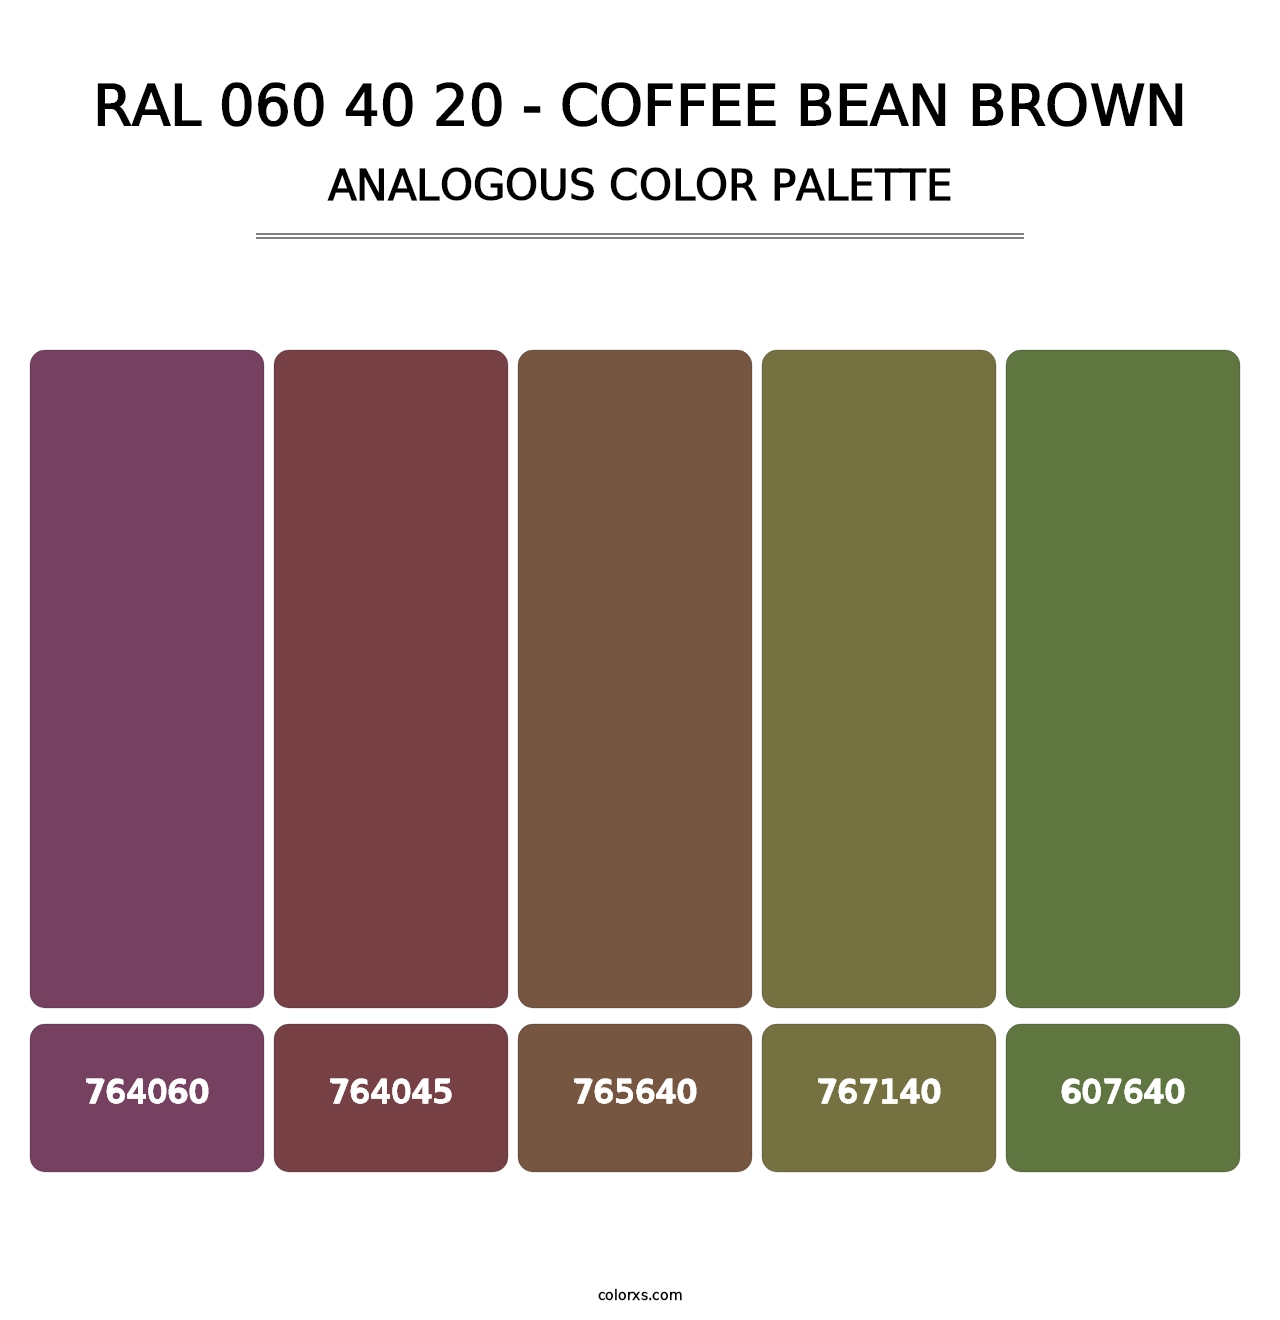 RAL 060 40 20 - Coffee Bean Brown - Analogous Color Palette